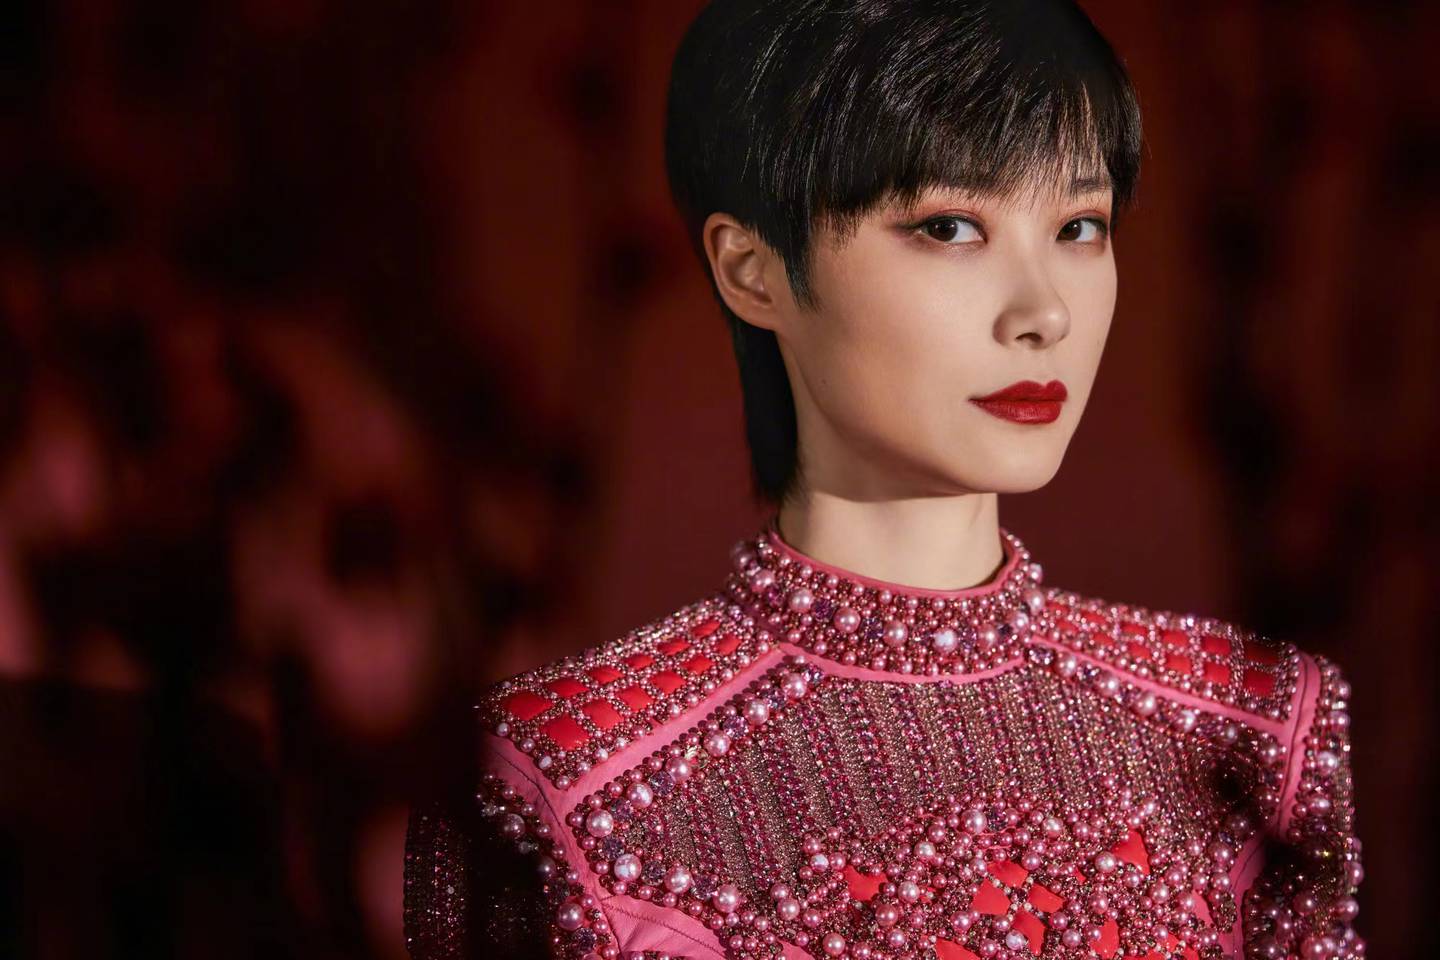 Chinese singer Li Yuchun, also known as Chris Lee, wears a Balmain x Barbie limited edition outfit.